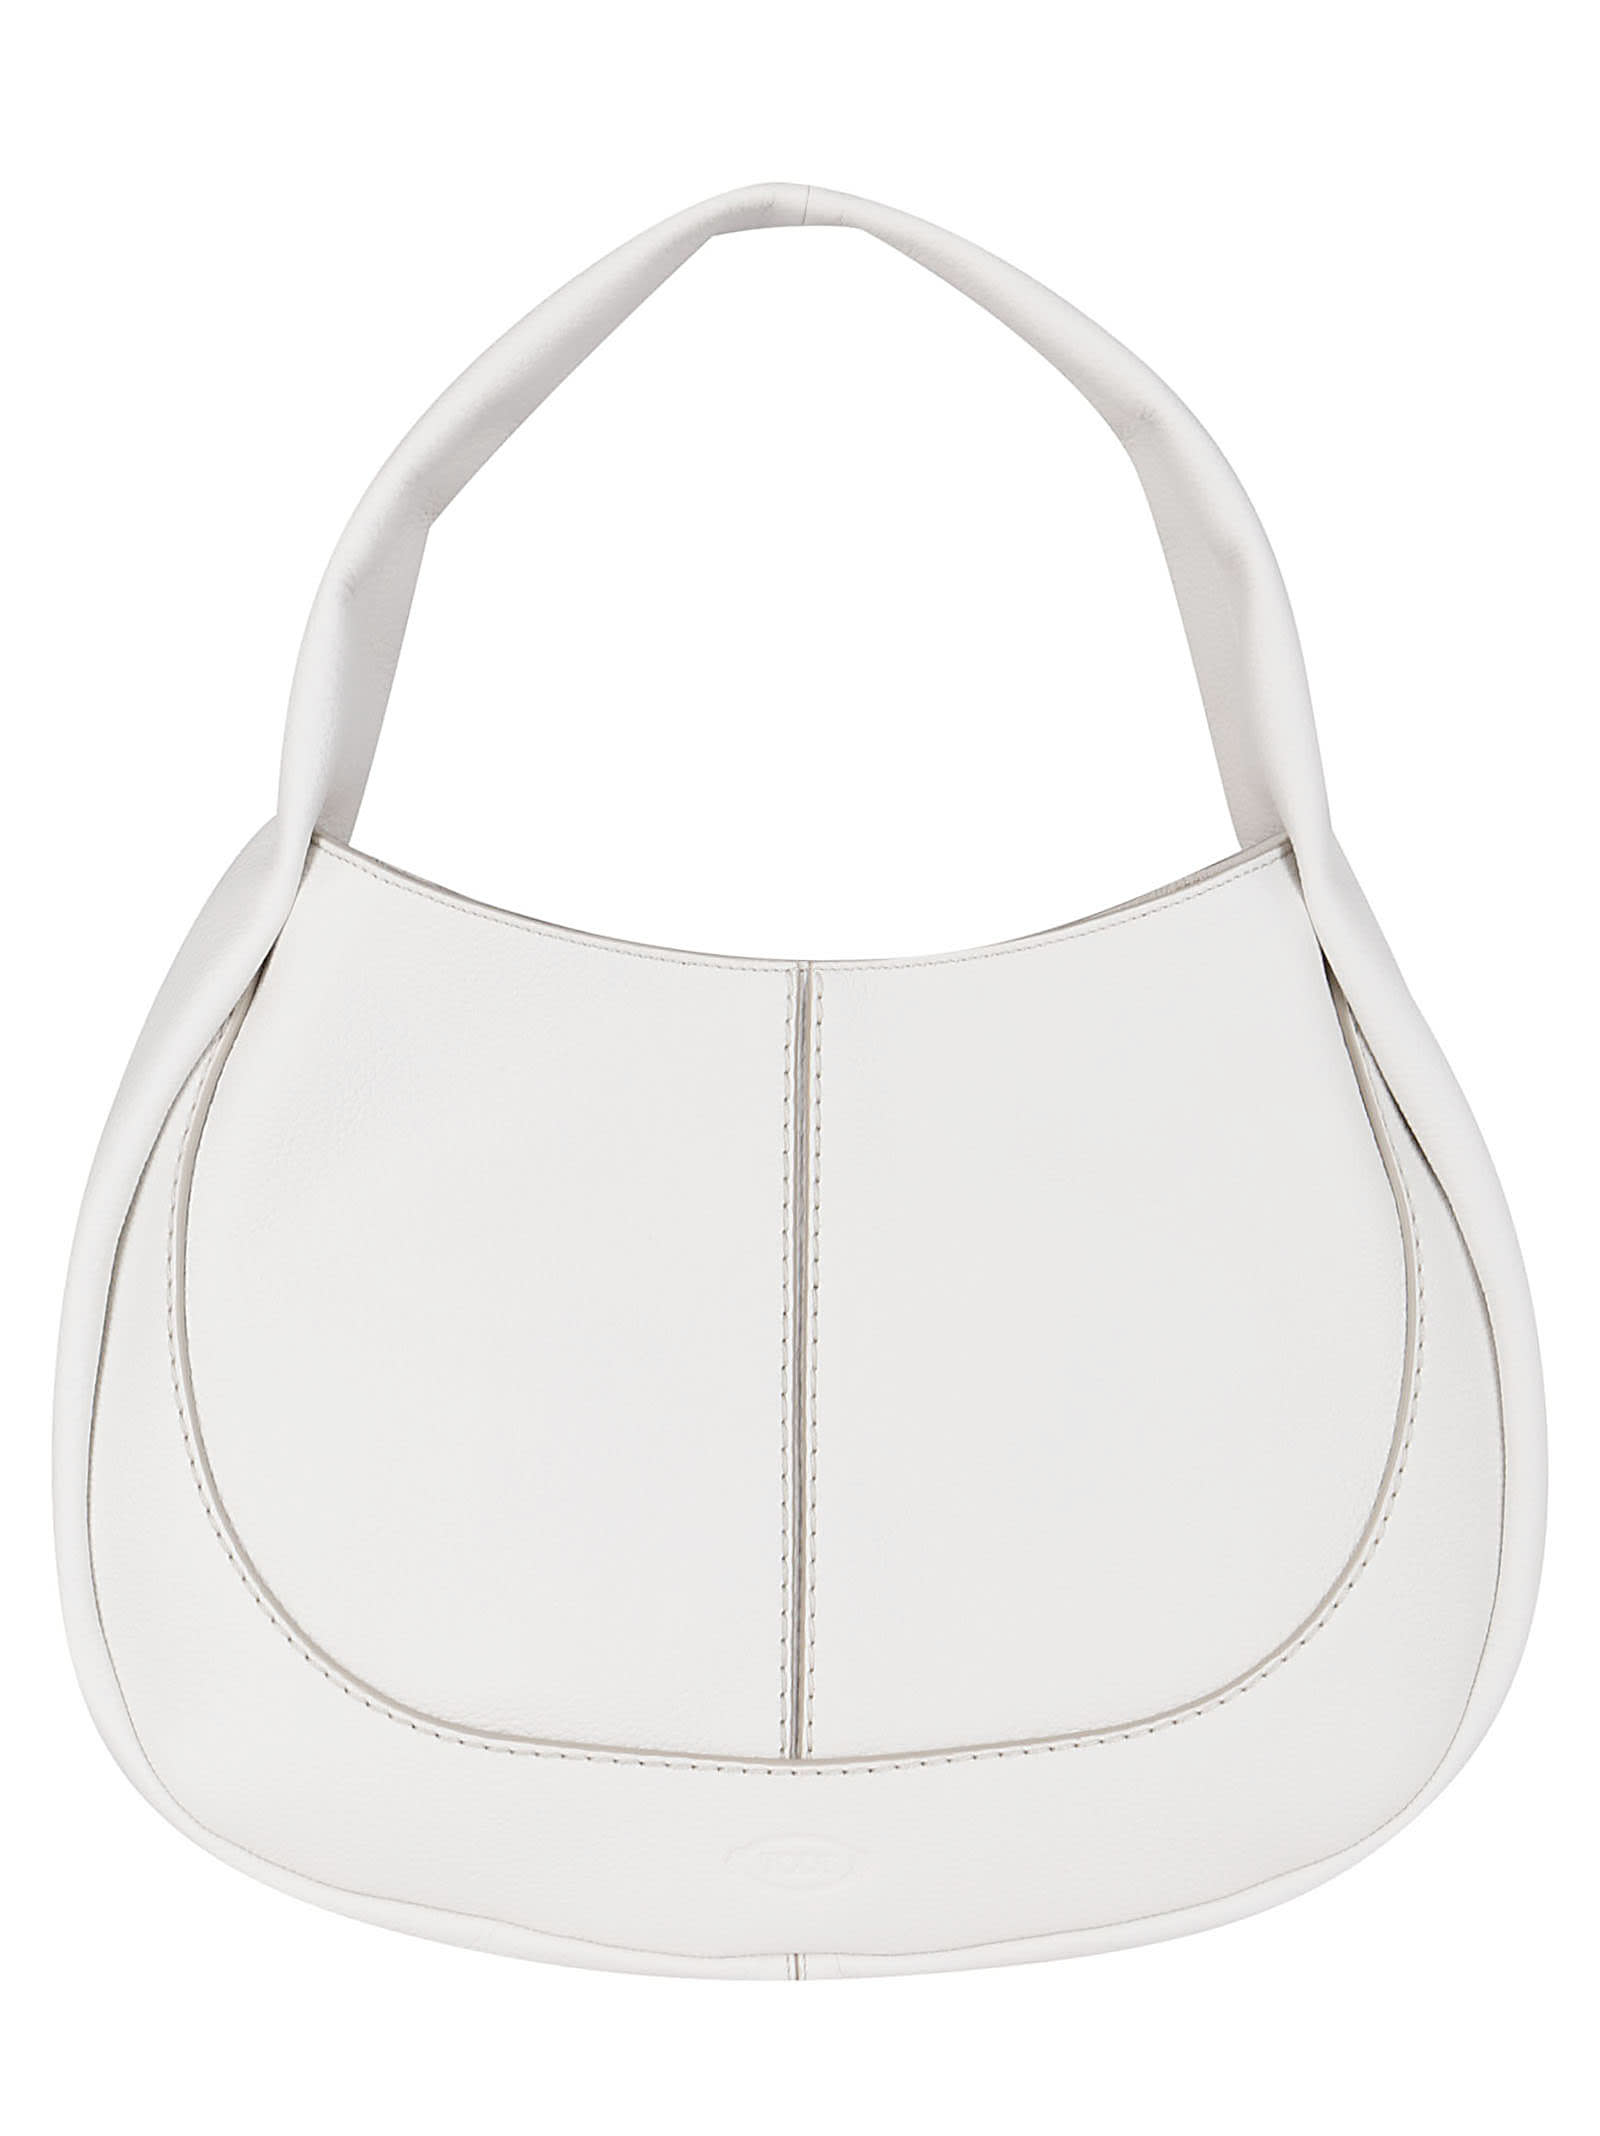 TOD'S WHITE LEATHER TOTE BAG,XBWAOUS0300UCAB015